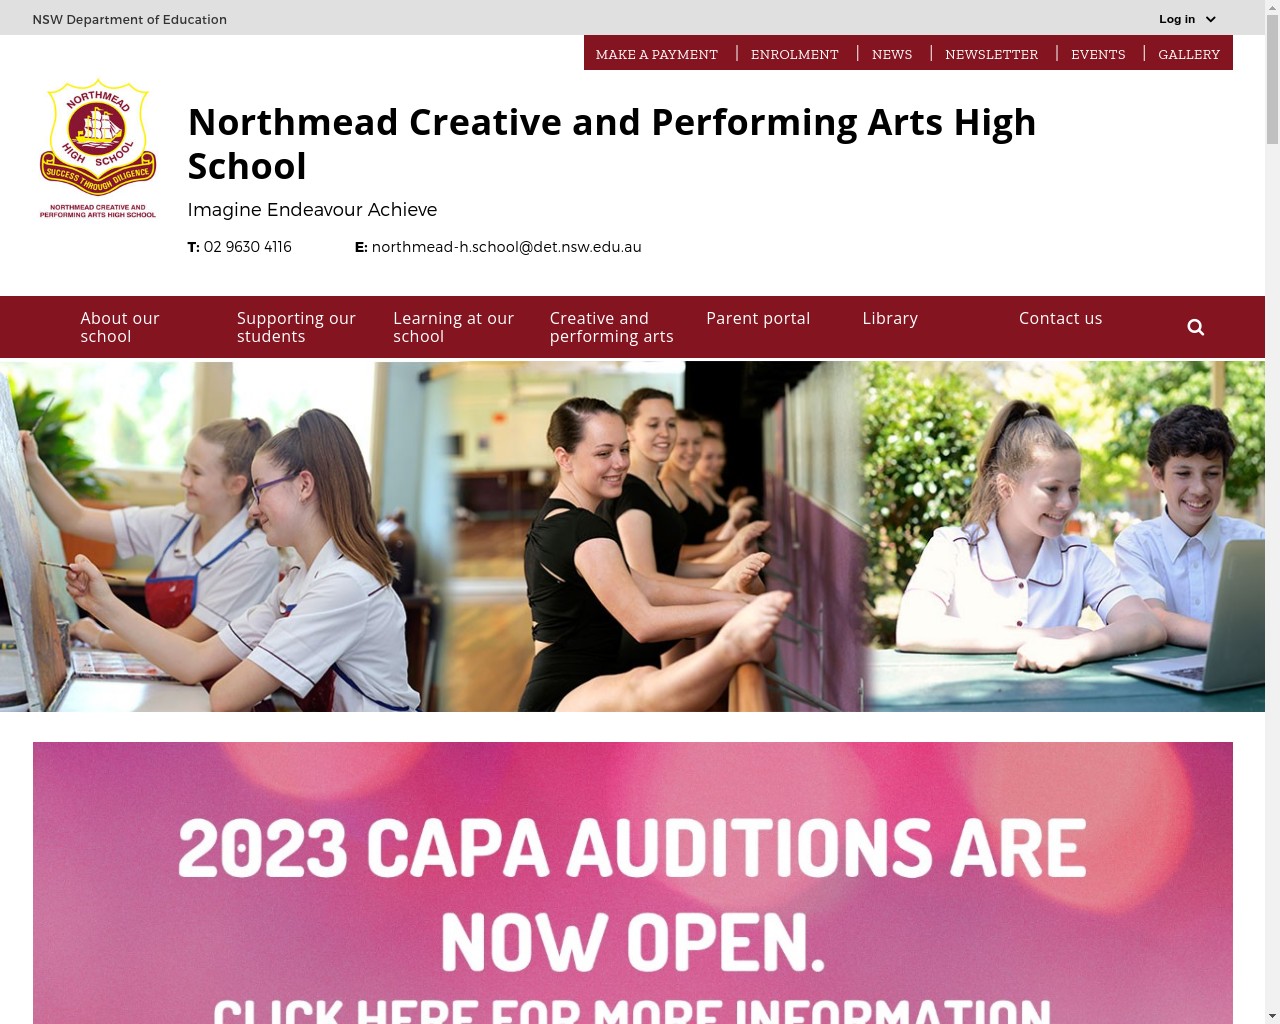 Northmead Creative and Performing Arts High School